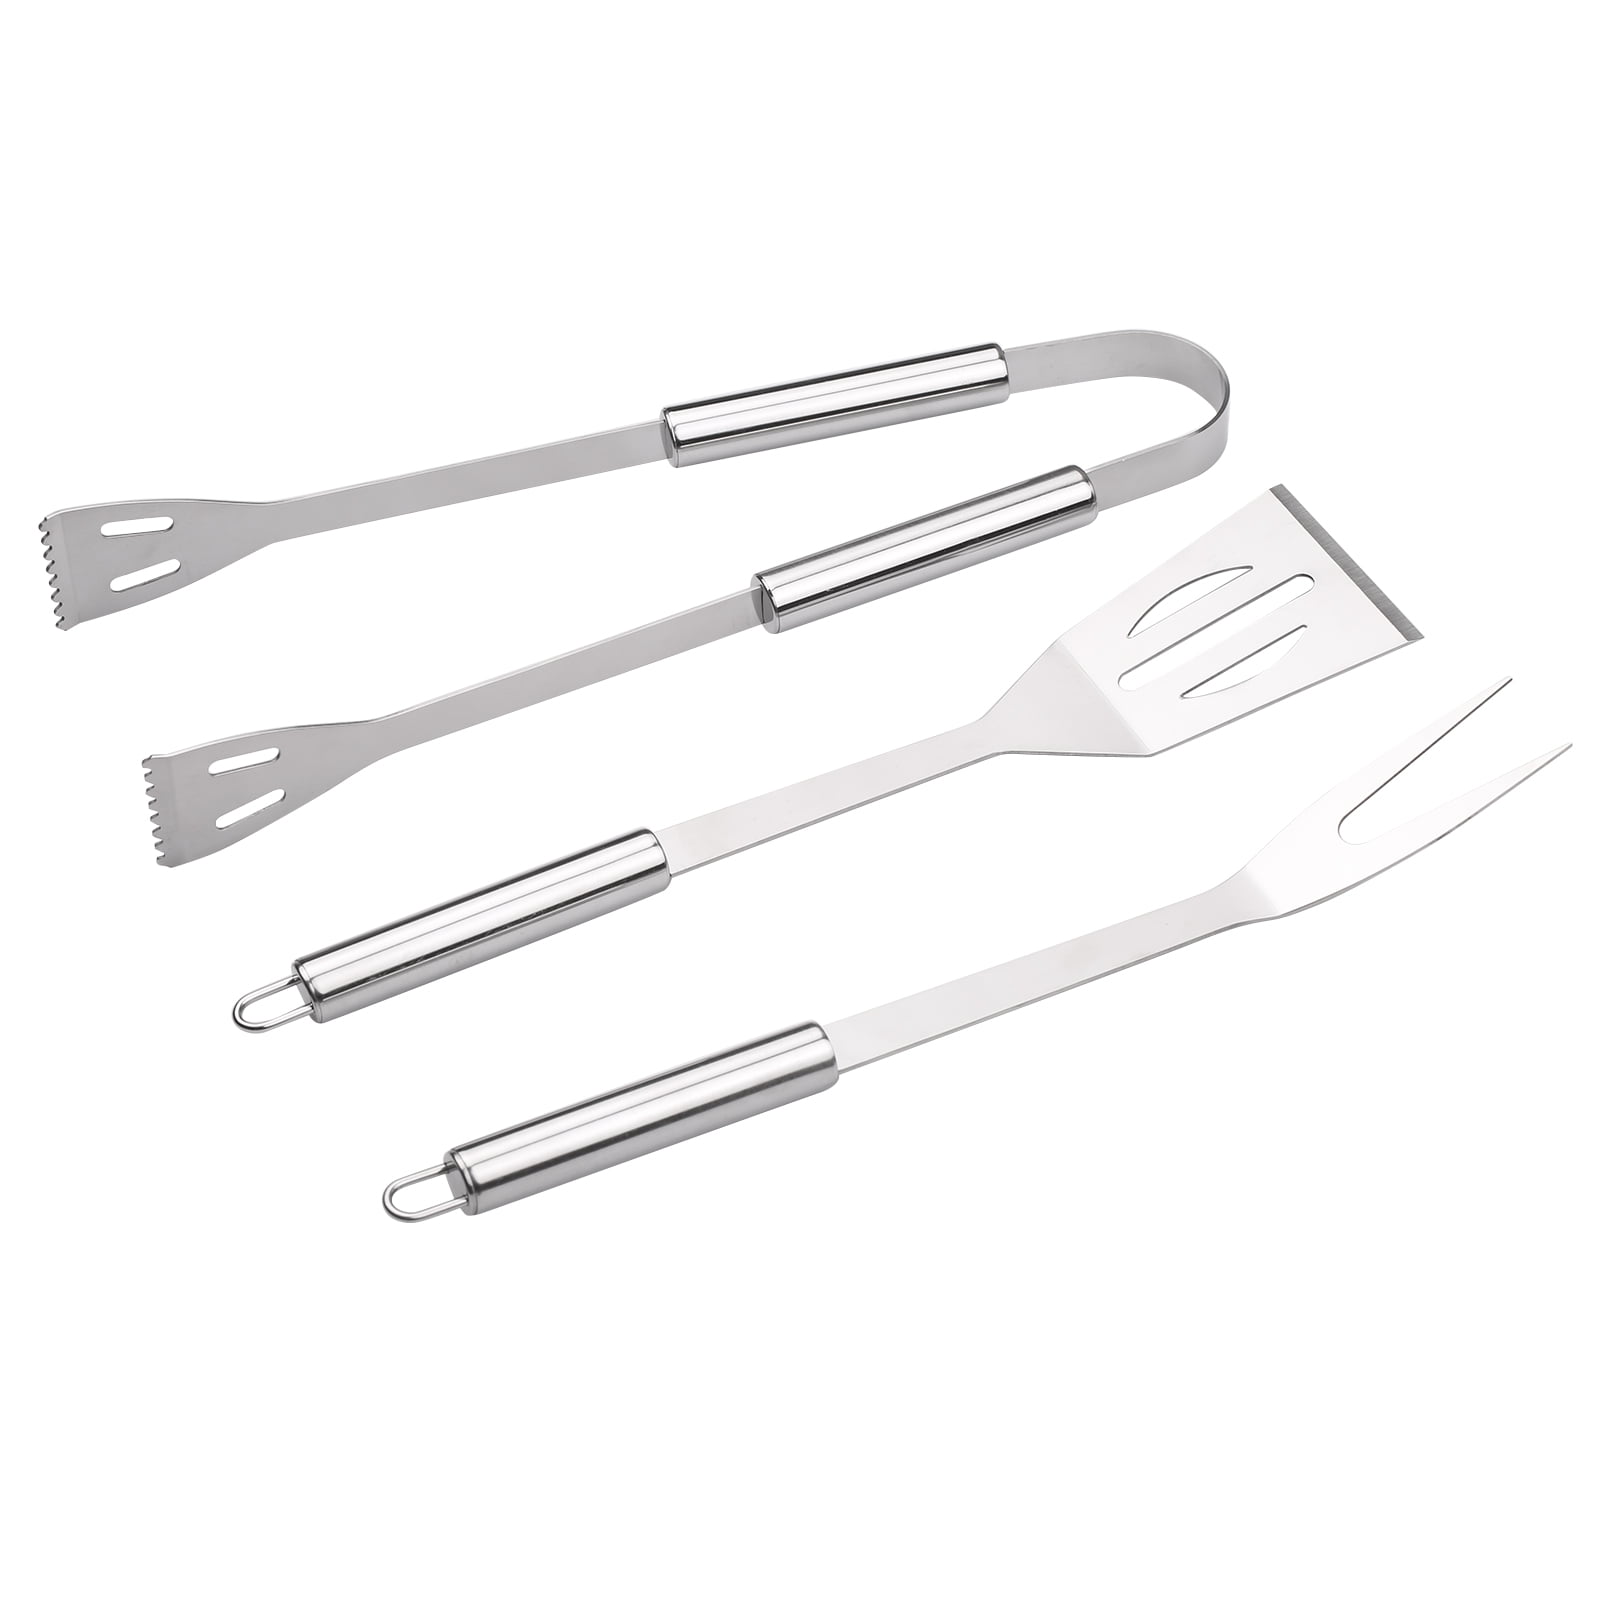 Stainless Steel BBQ Tools Set Barbecue Outdoor Details about   BBQ Grill Accessories 